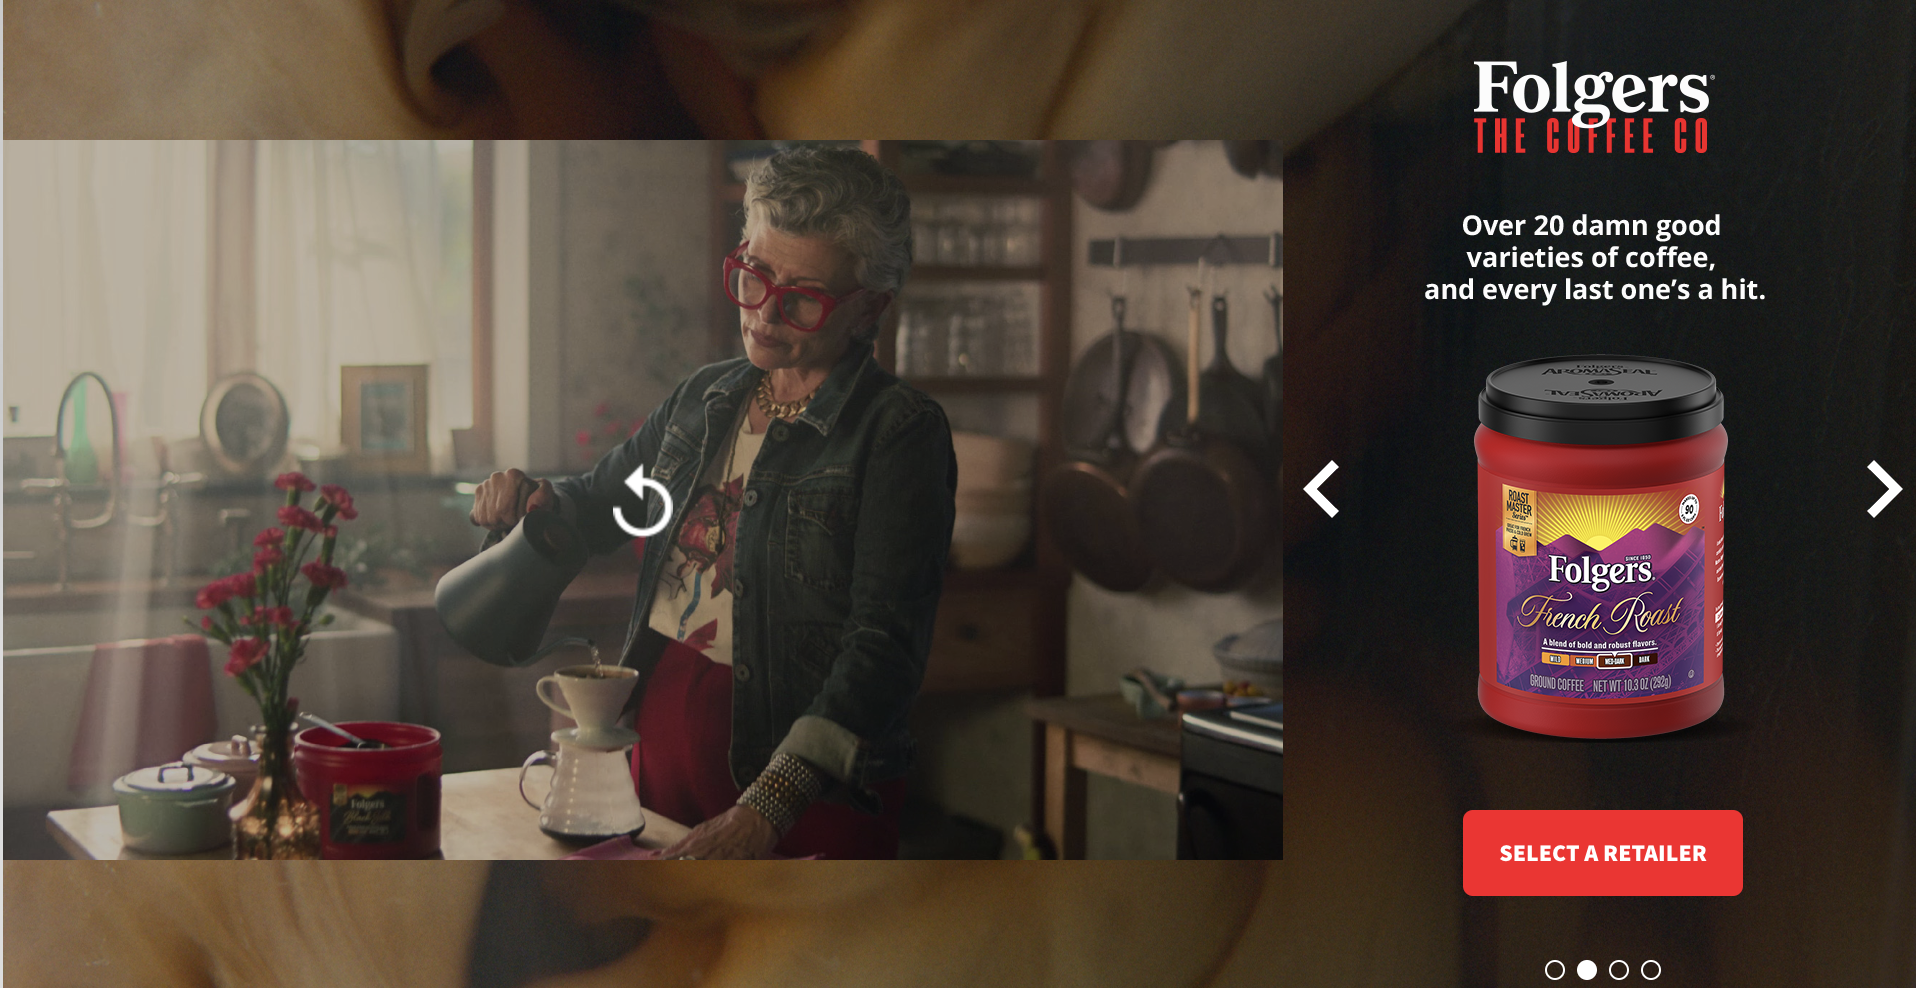 Folgers interactive ad